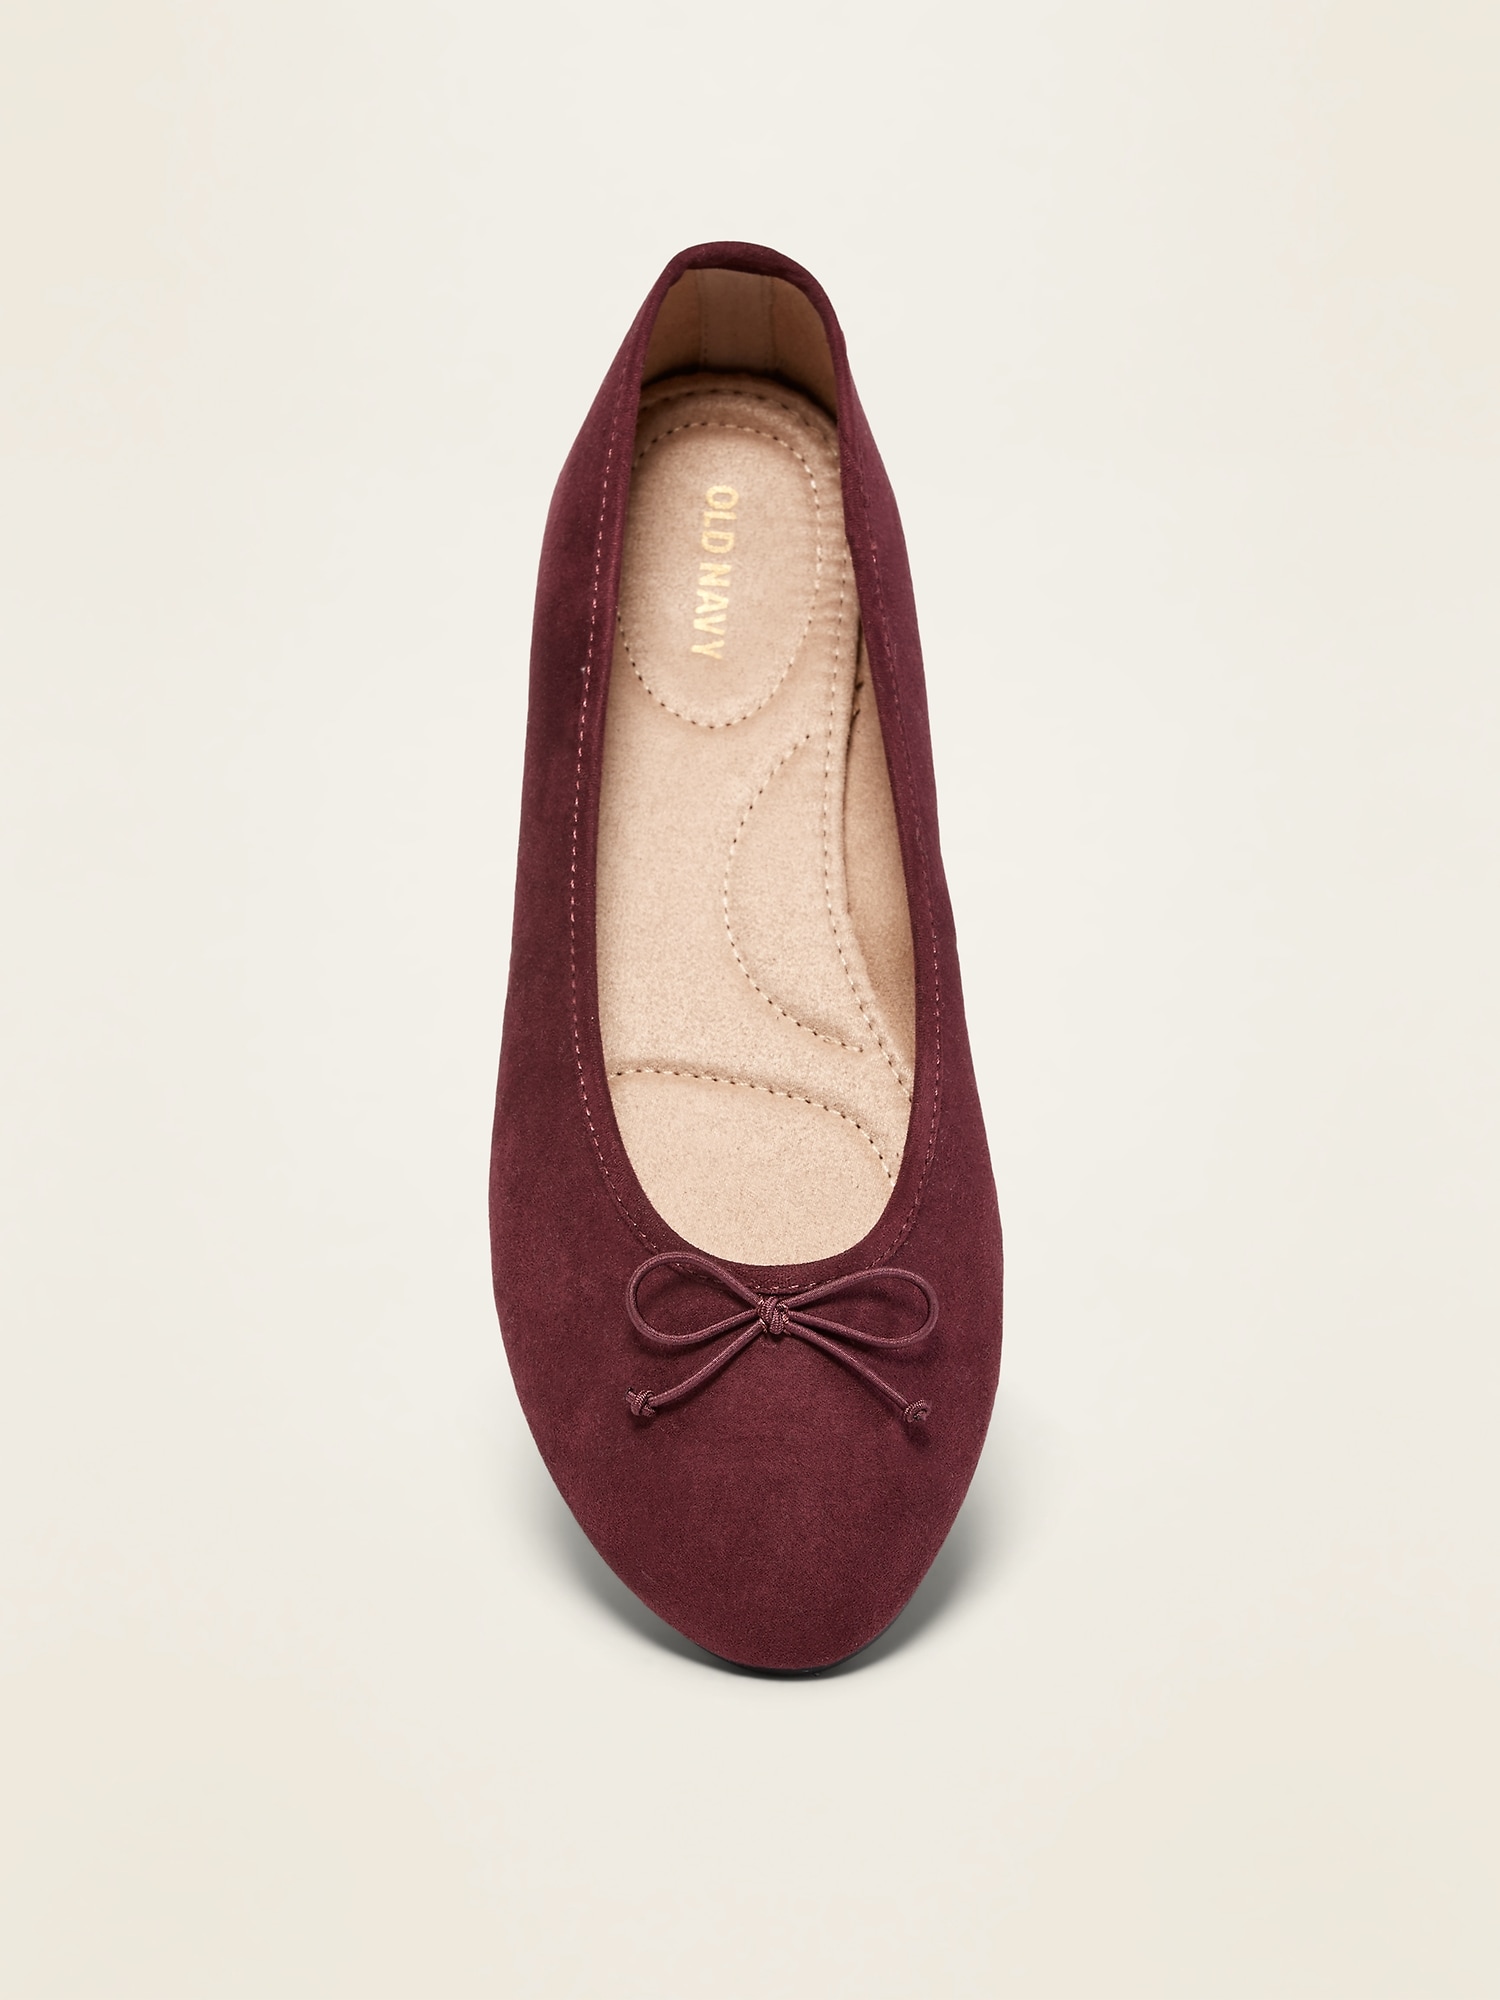 old navy womens shoes flats